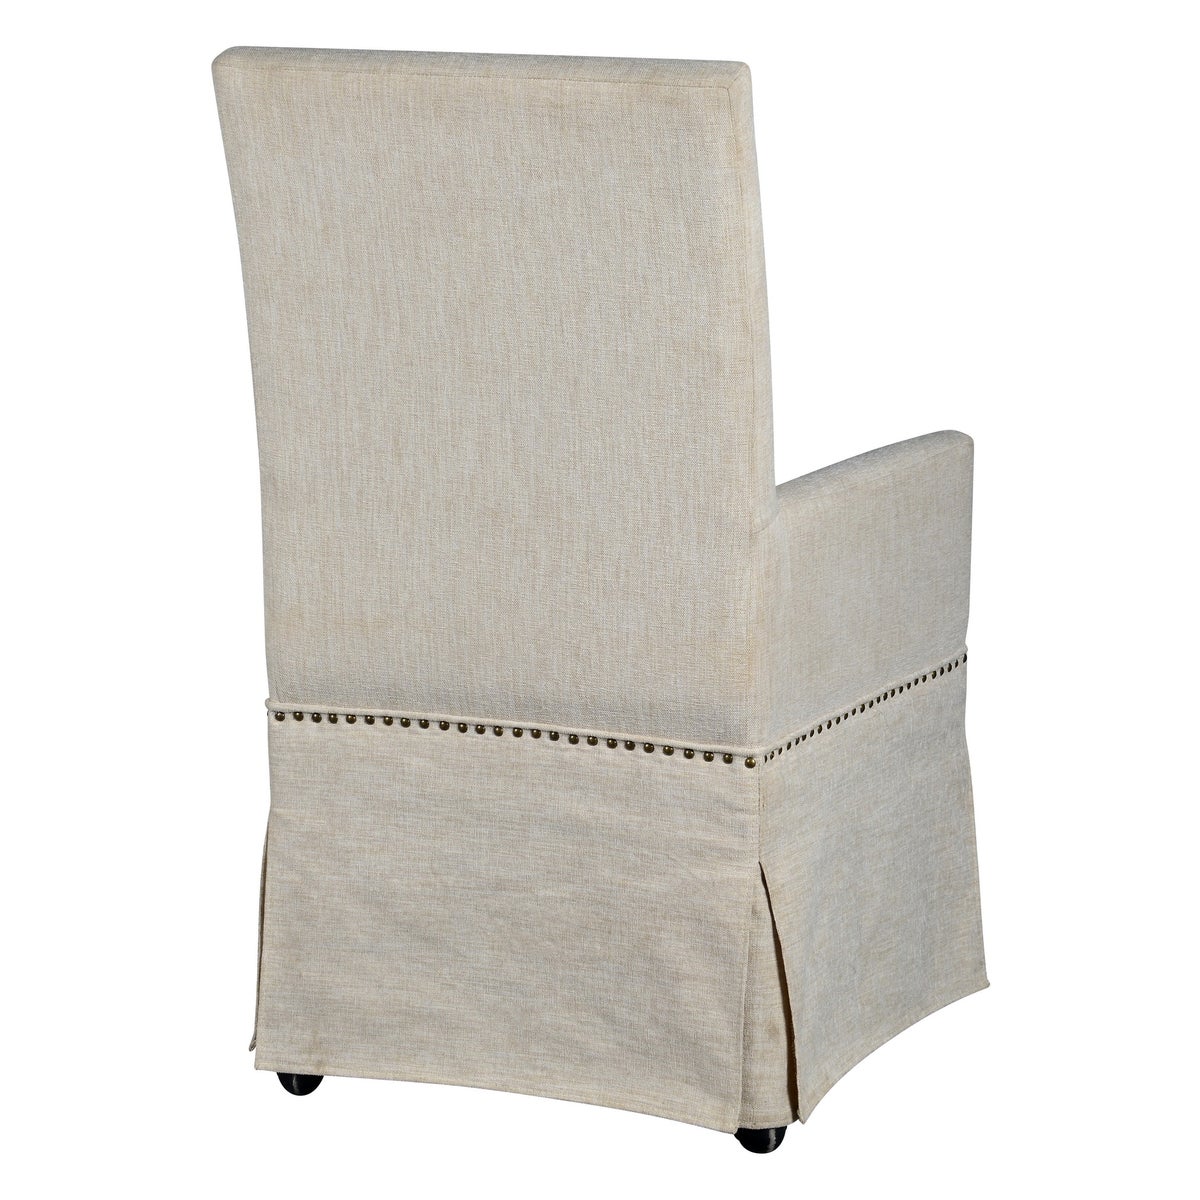 -Margaret Dining Chair (French Linen)